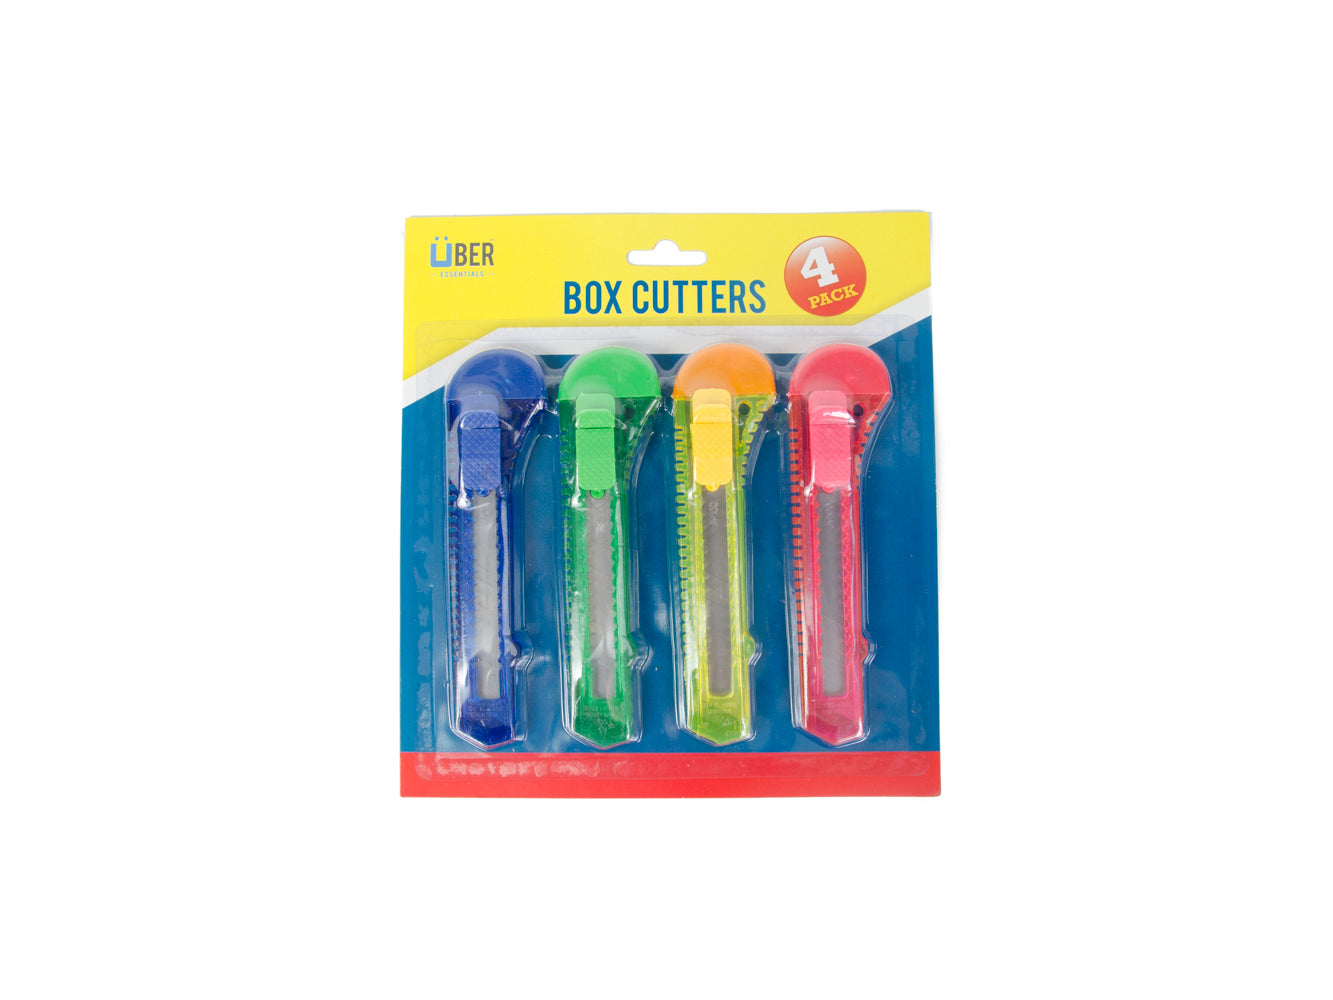 PACK OF 4 BOX CUTTERS   HDW1453